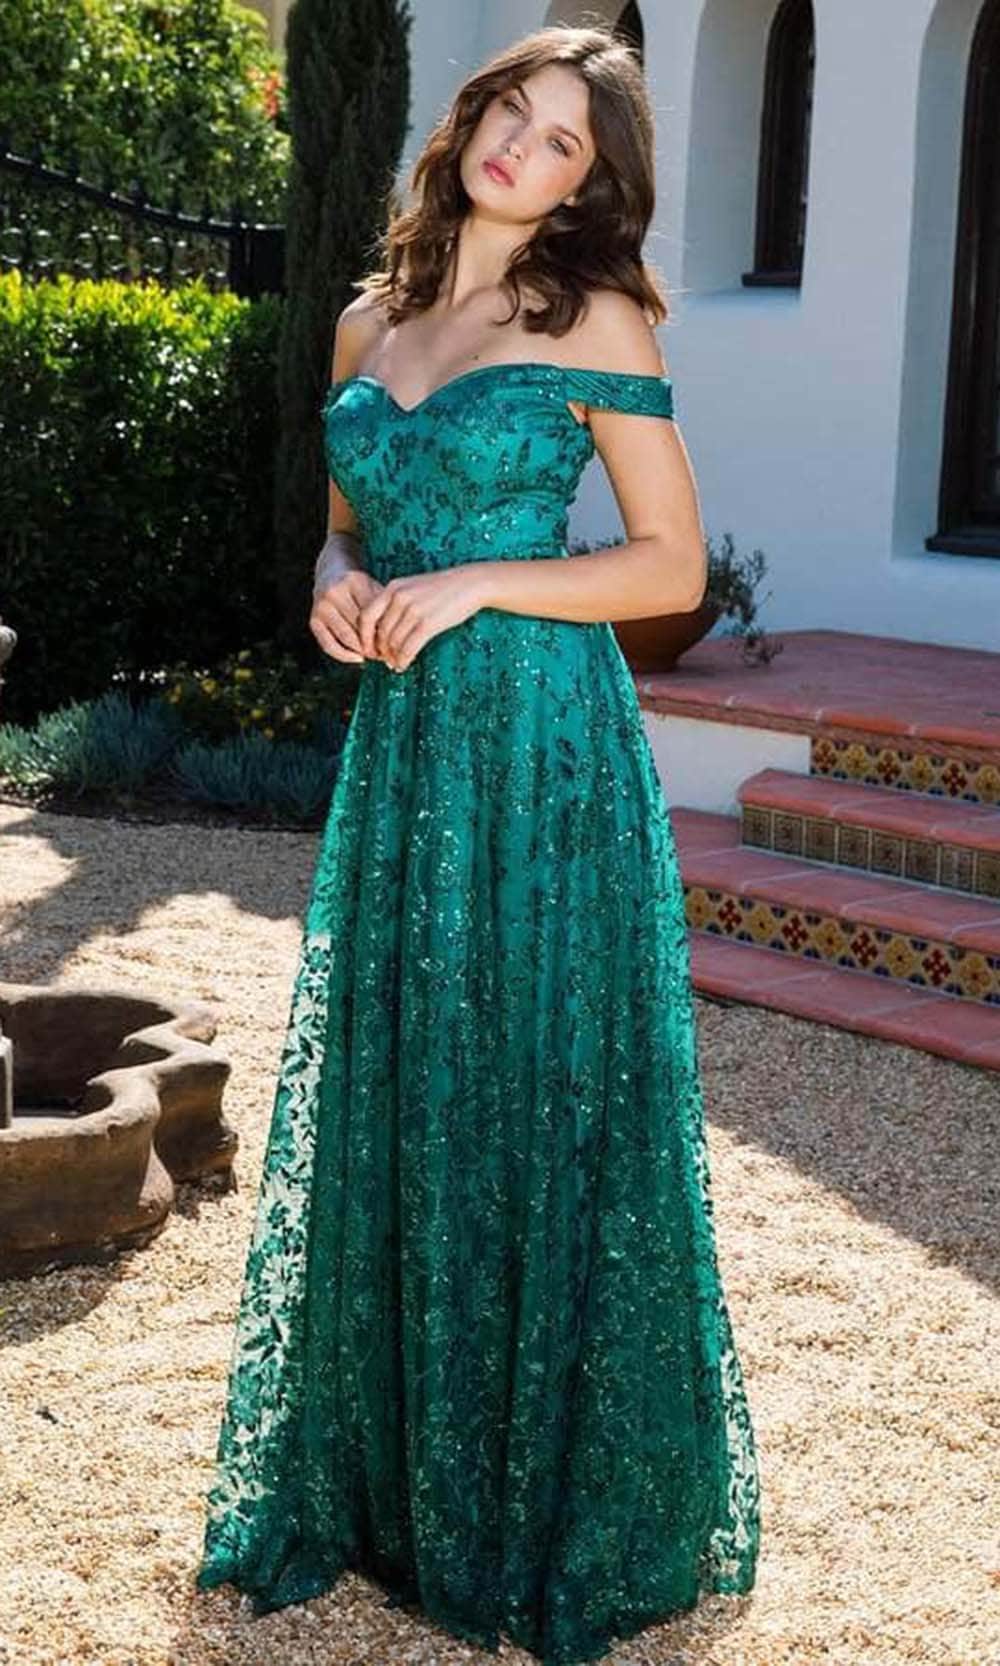 Eureka Fashion 9766 - Embroidered Off-shoulder Evening Gown Evening Gowns XS / Emerald Green